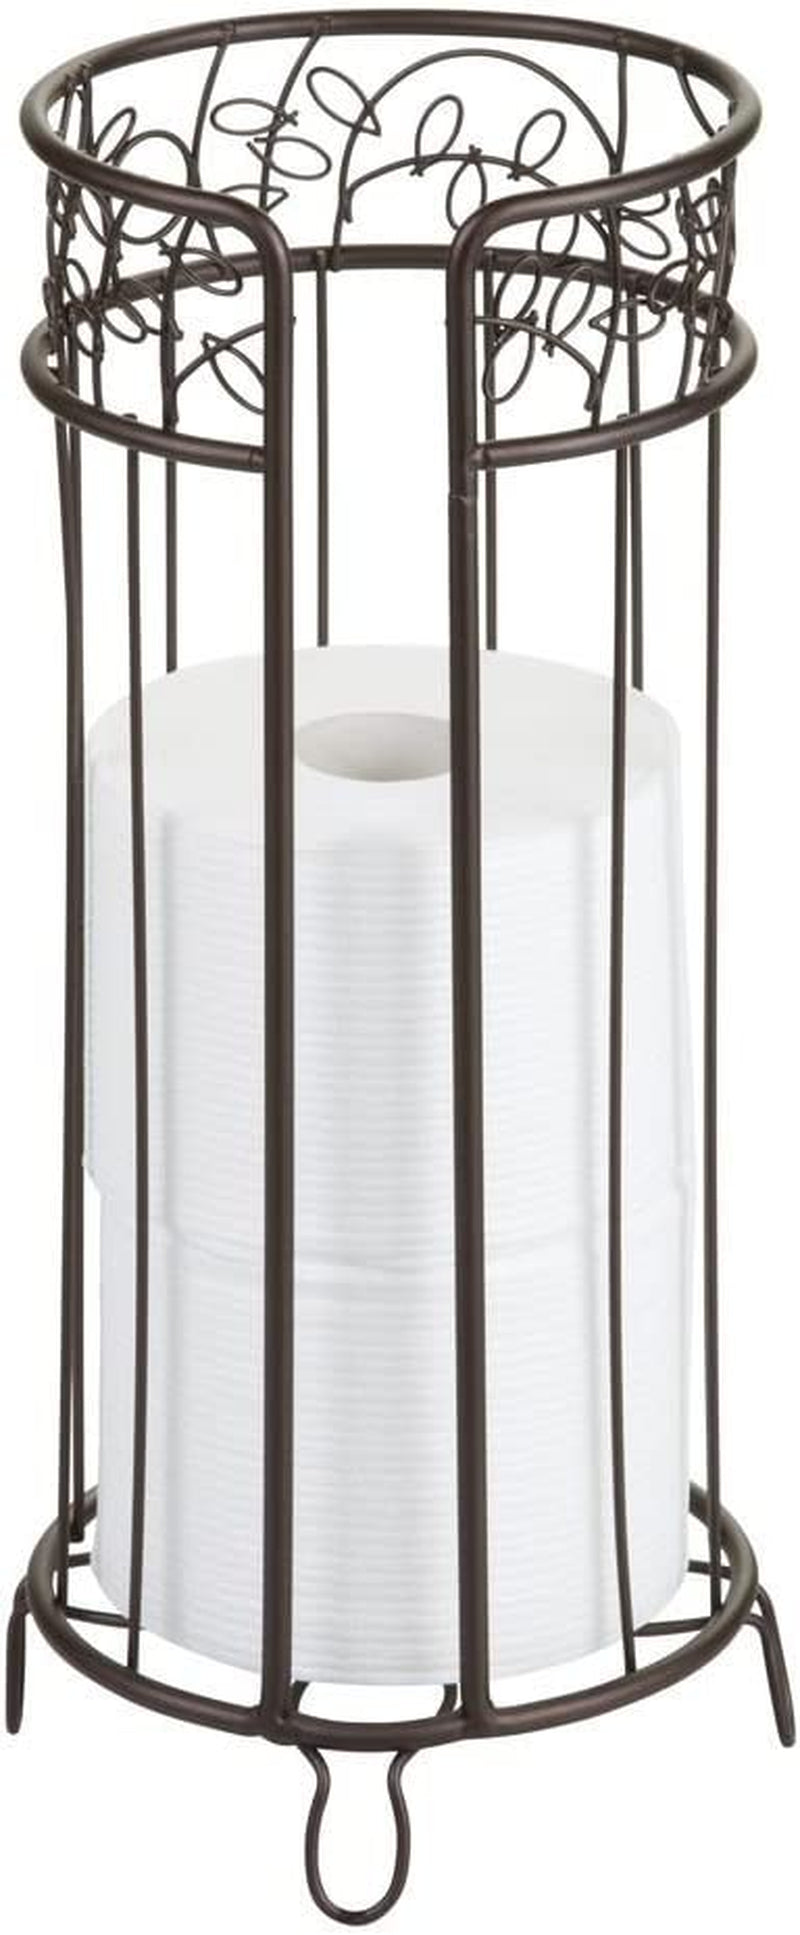 Idesign Metal Tissue Holder Stand the Twigz Collection – Holds 3 Rolls of Toilet Paper, Bronze